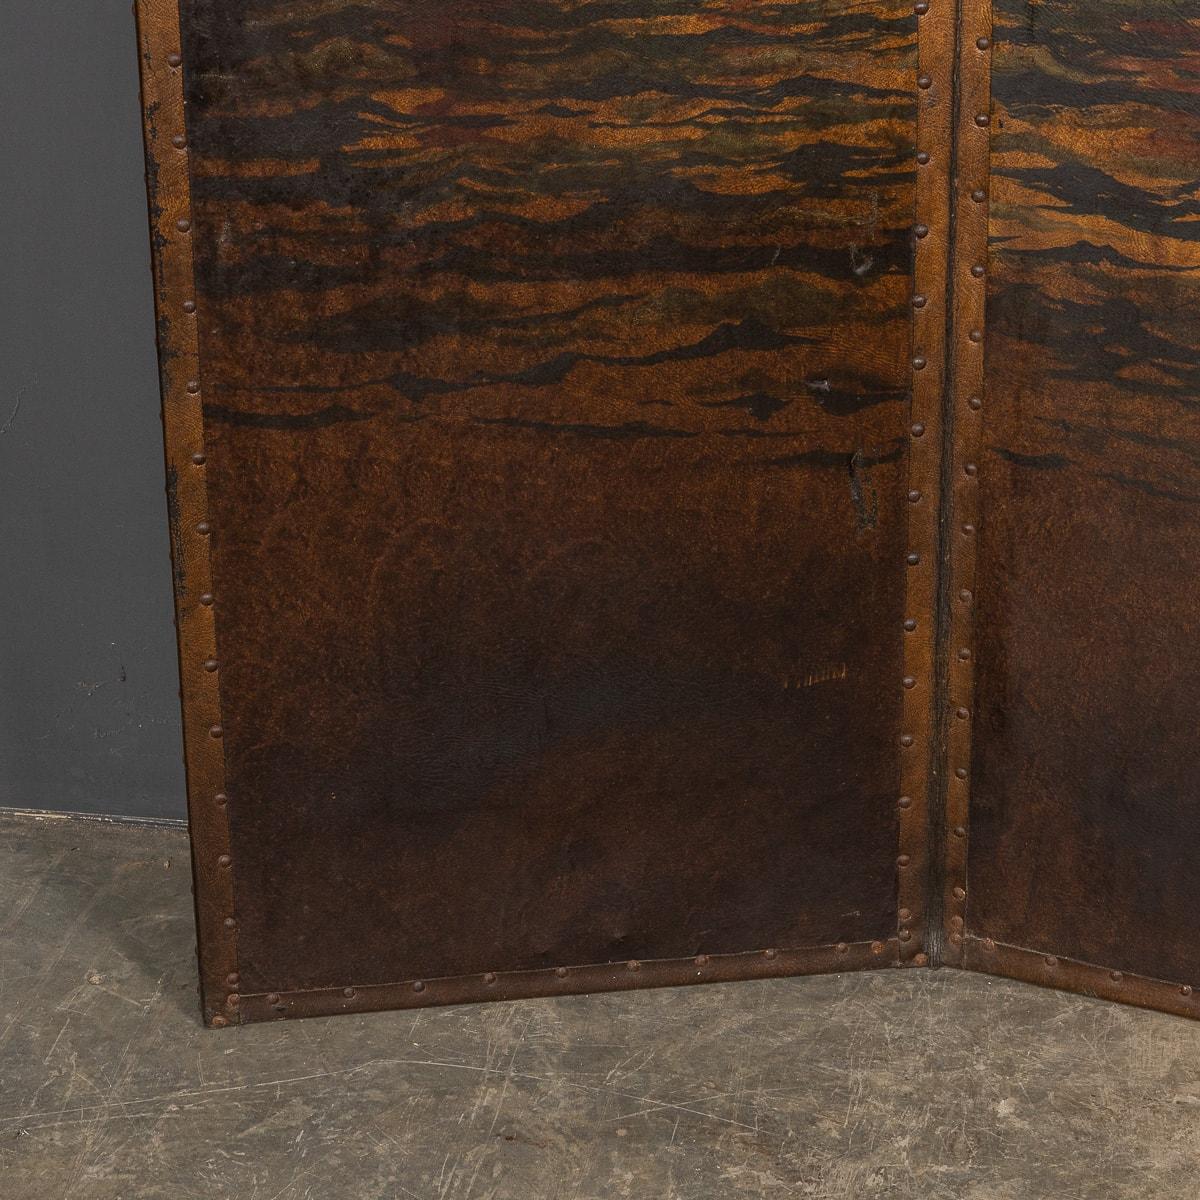 20th Century Oil Painted On Leather Room Screen, c.1920 For Sale 3